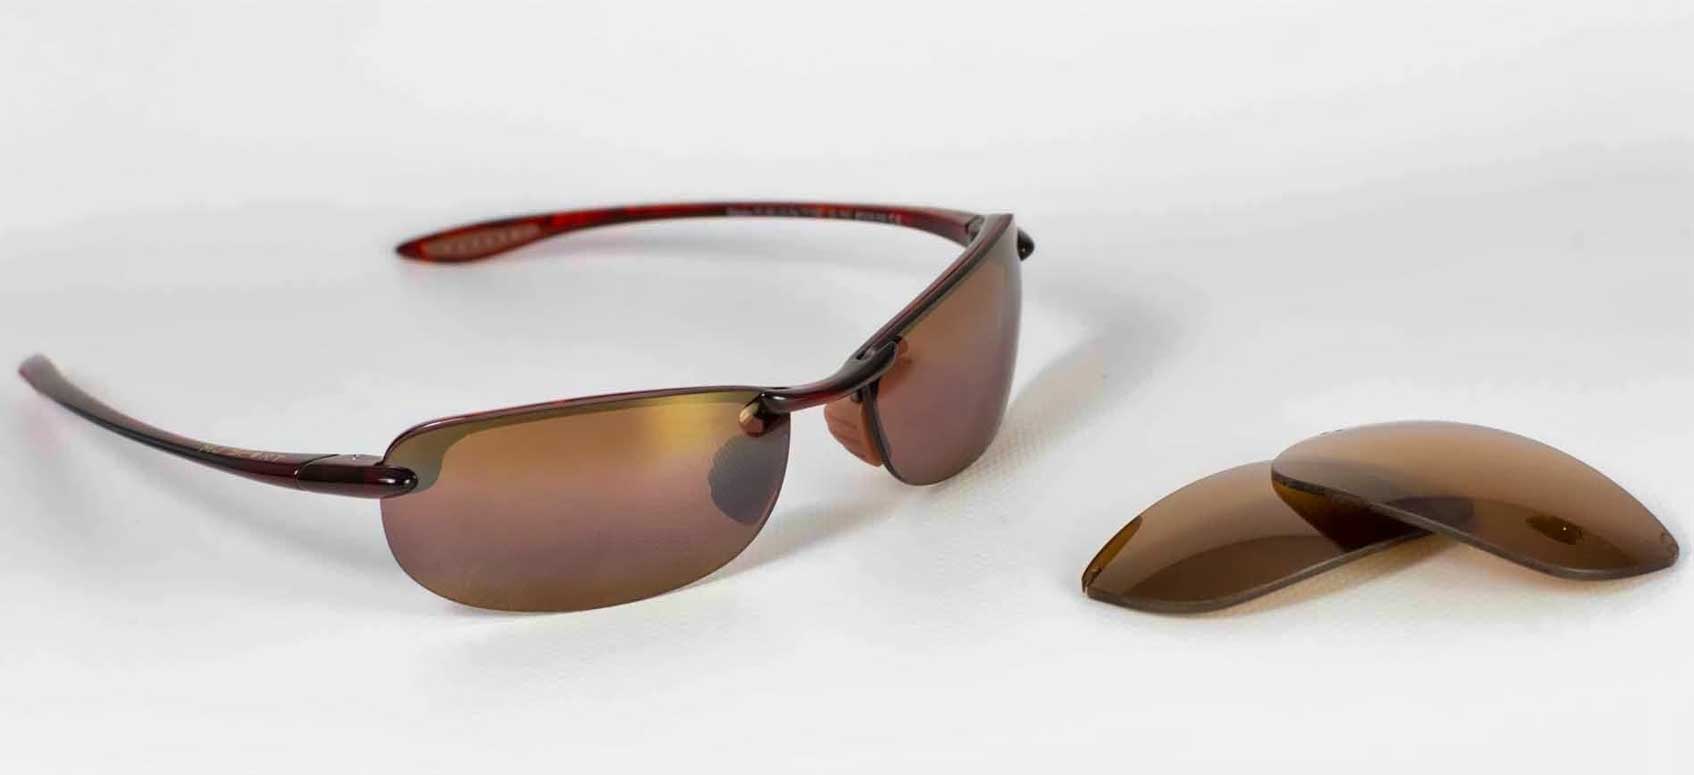 Maui Jim Sunglasses with SFx Replacement Lenses